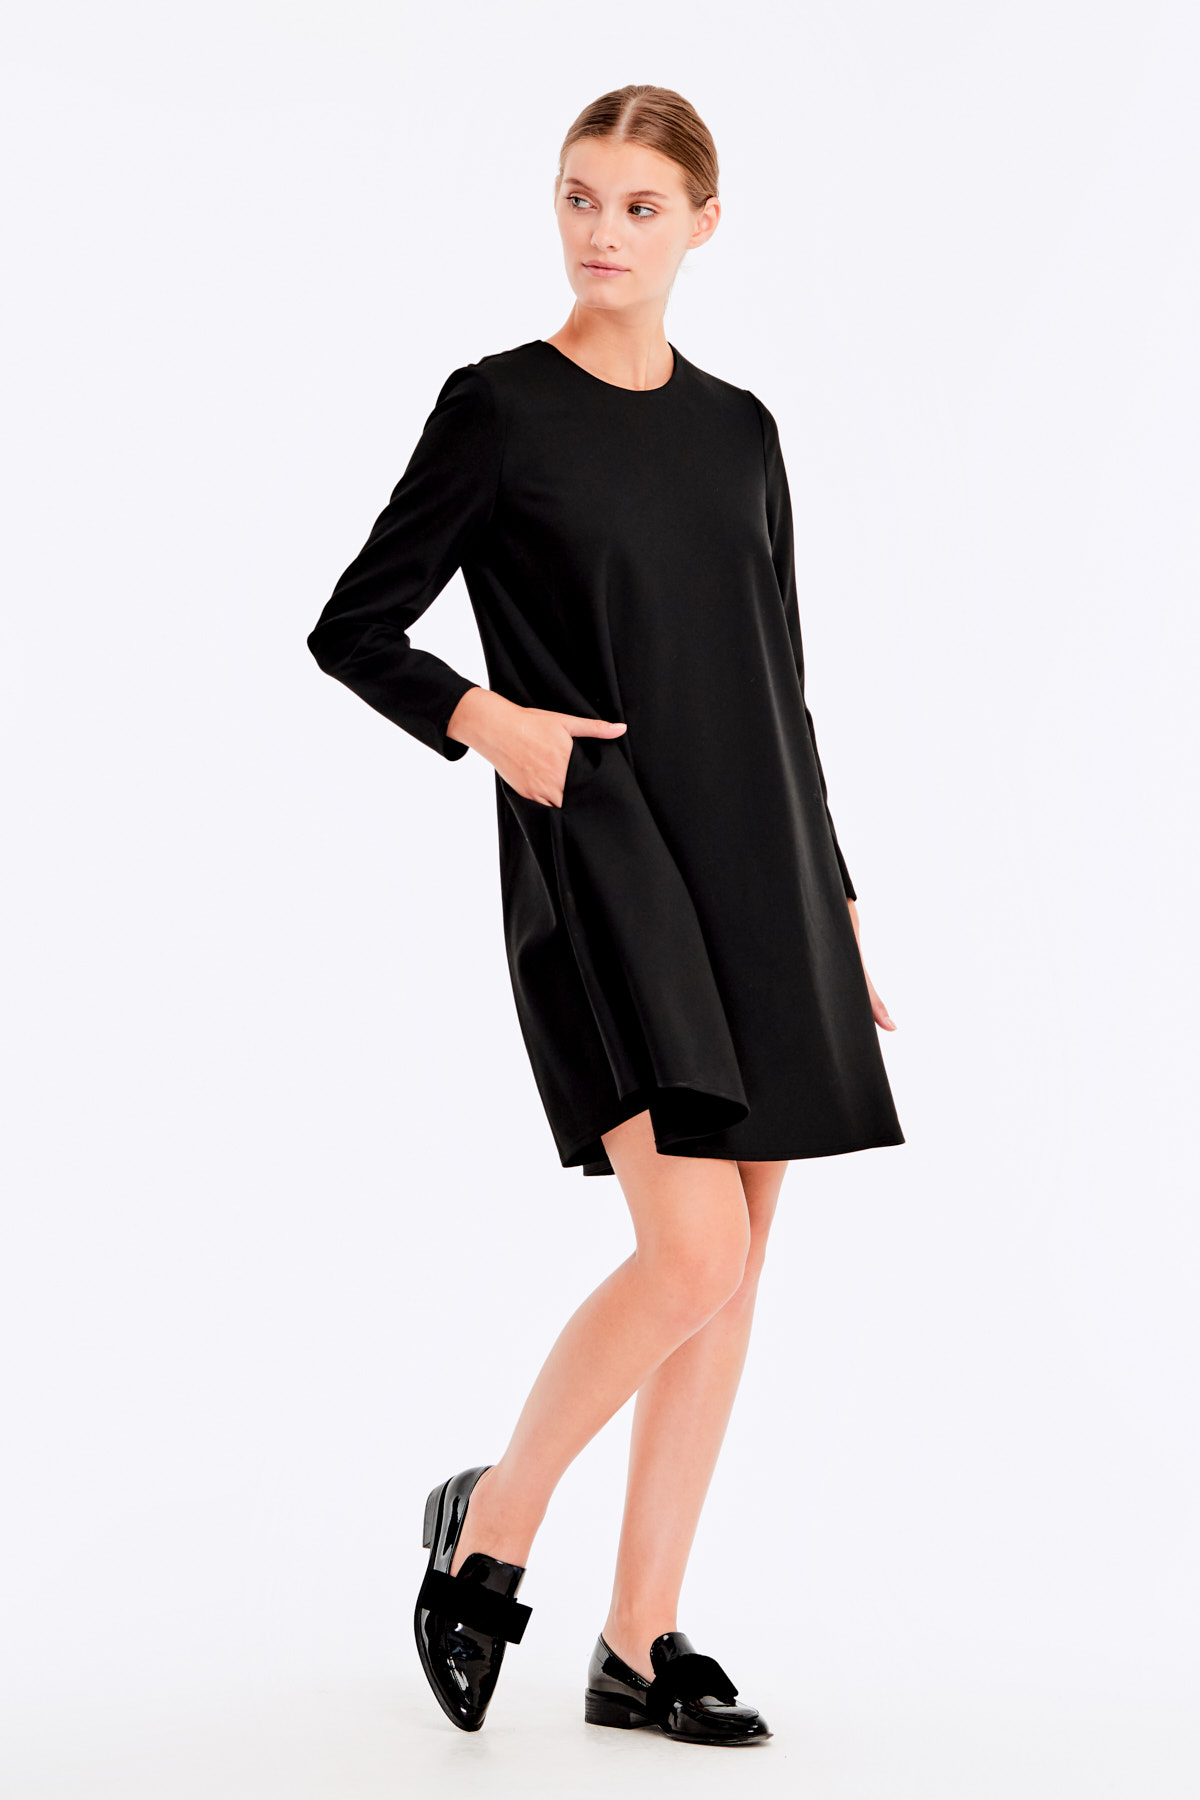 Loose-fitting black dress with a white collar , photo 10